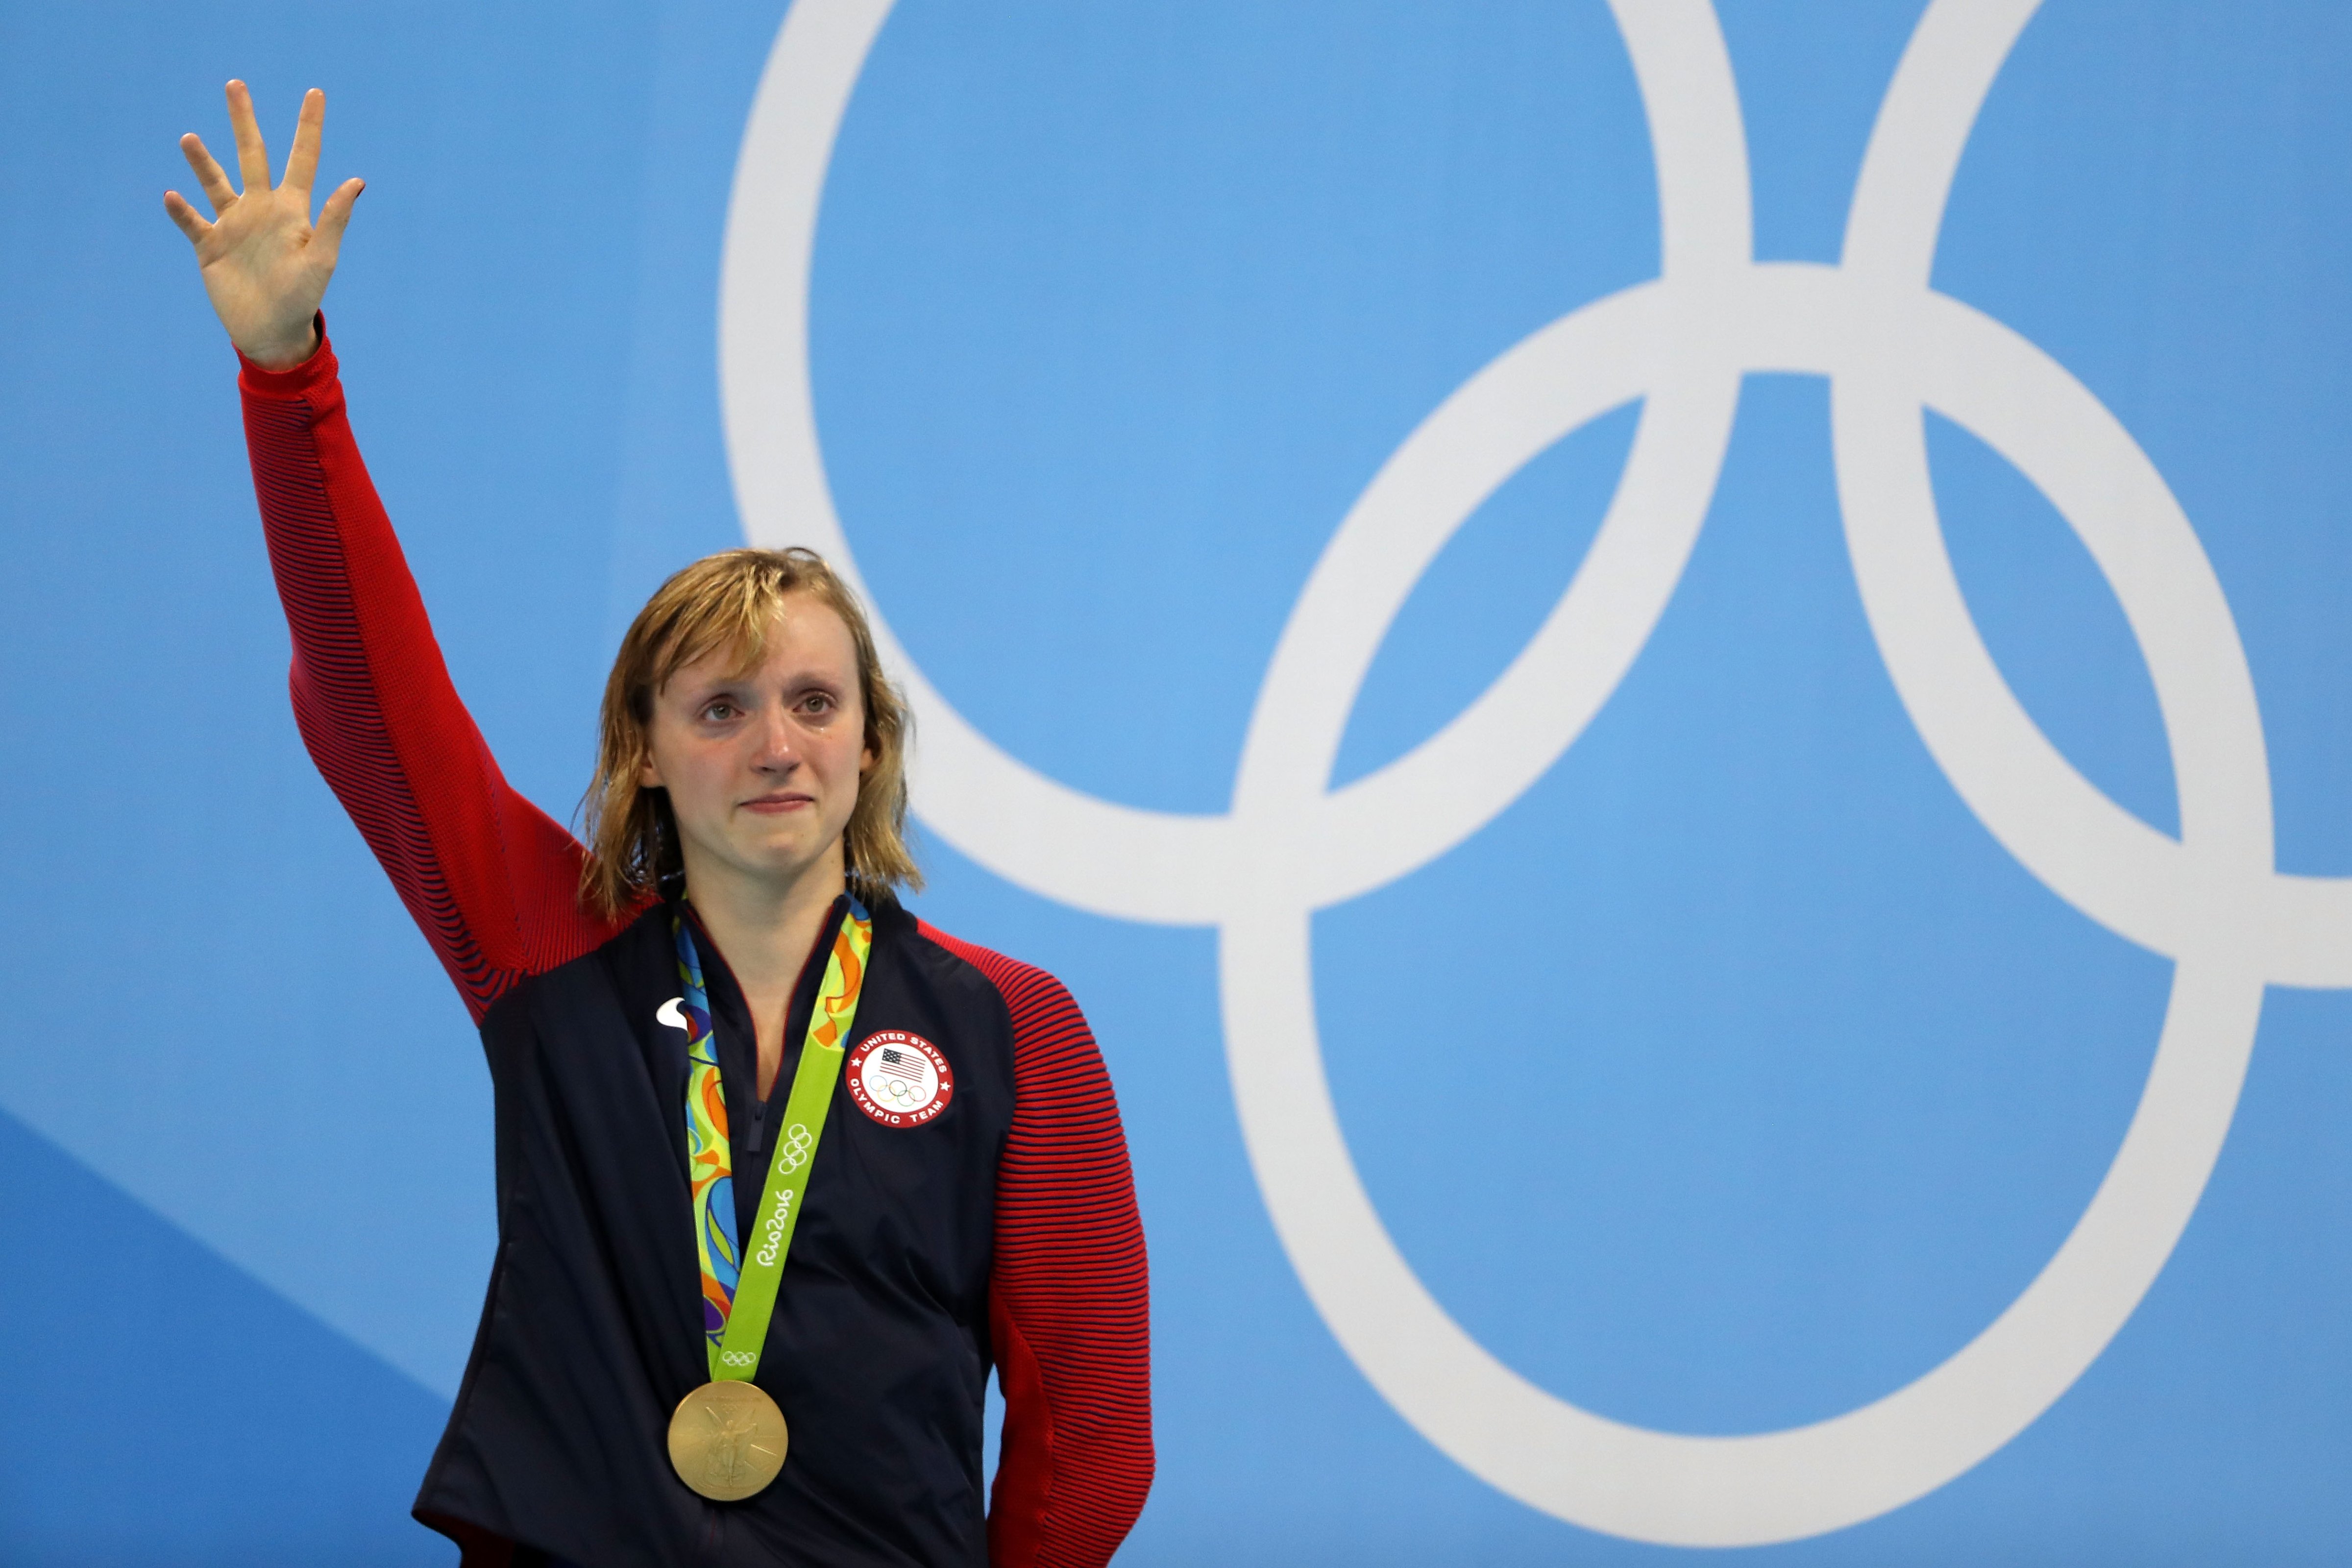 Katie Ledecky after winning gold in the Women's 800m Freestyle Final on Day 7 of the Rio 2016 Olympic Games, on August 12, 2016. (Al Bello—Getty Images)